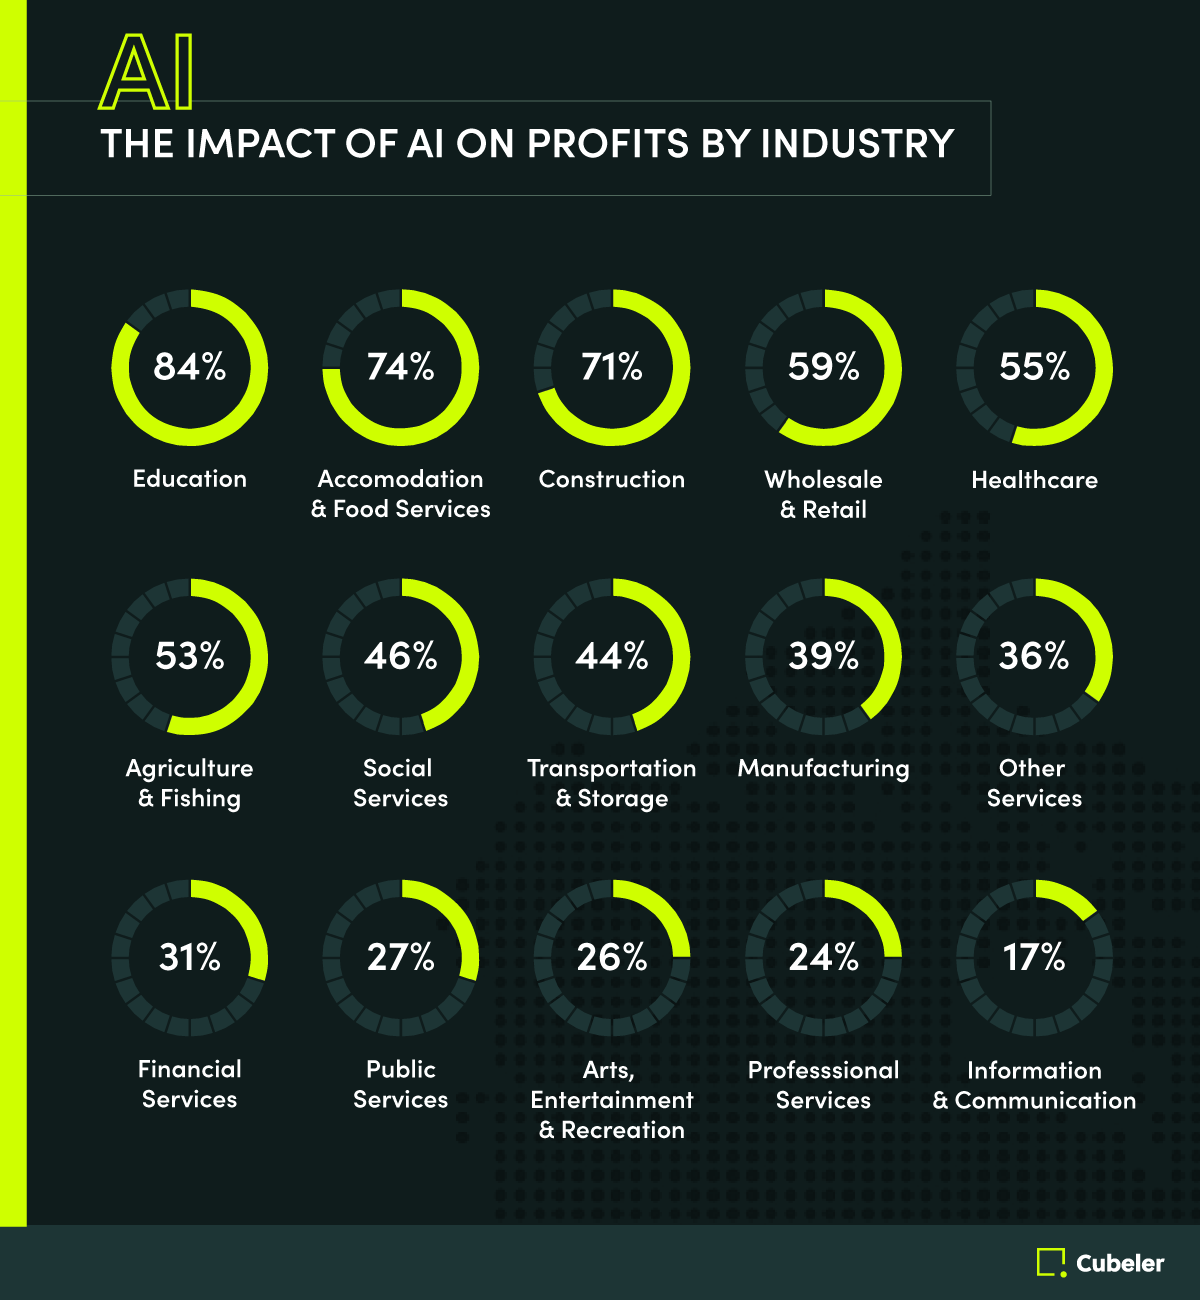 The Impact of AI on profits (By Industry)